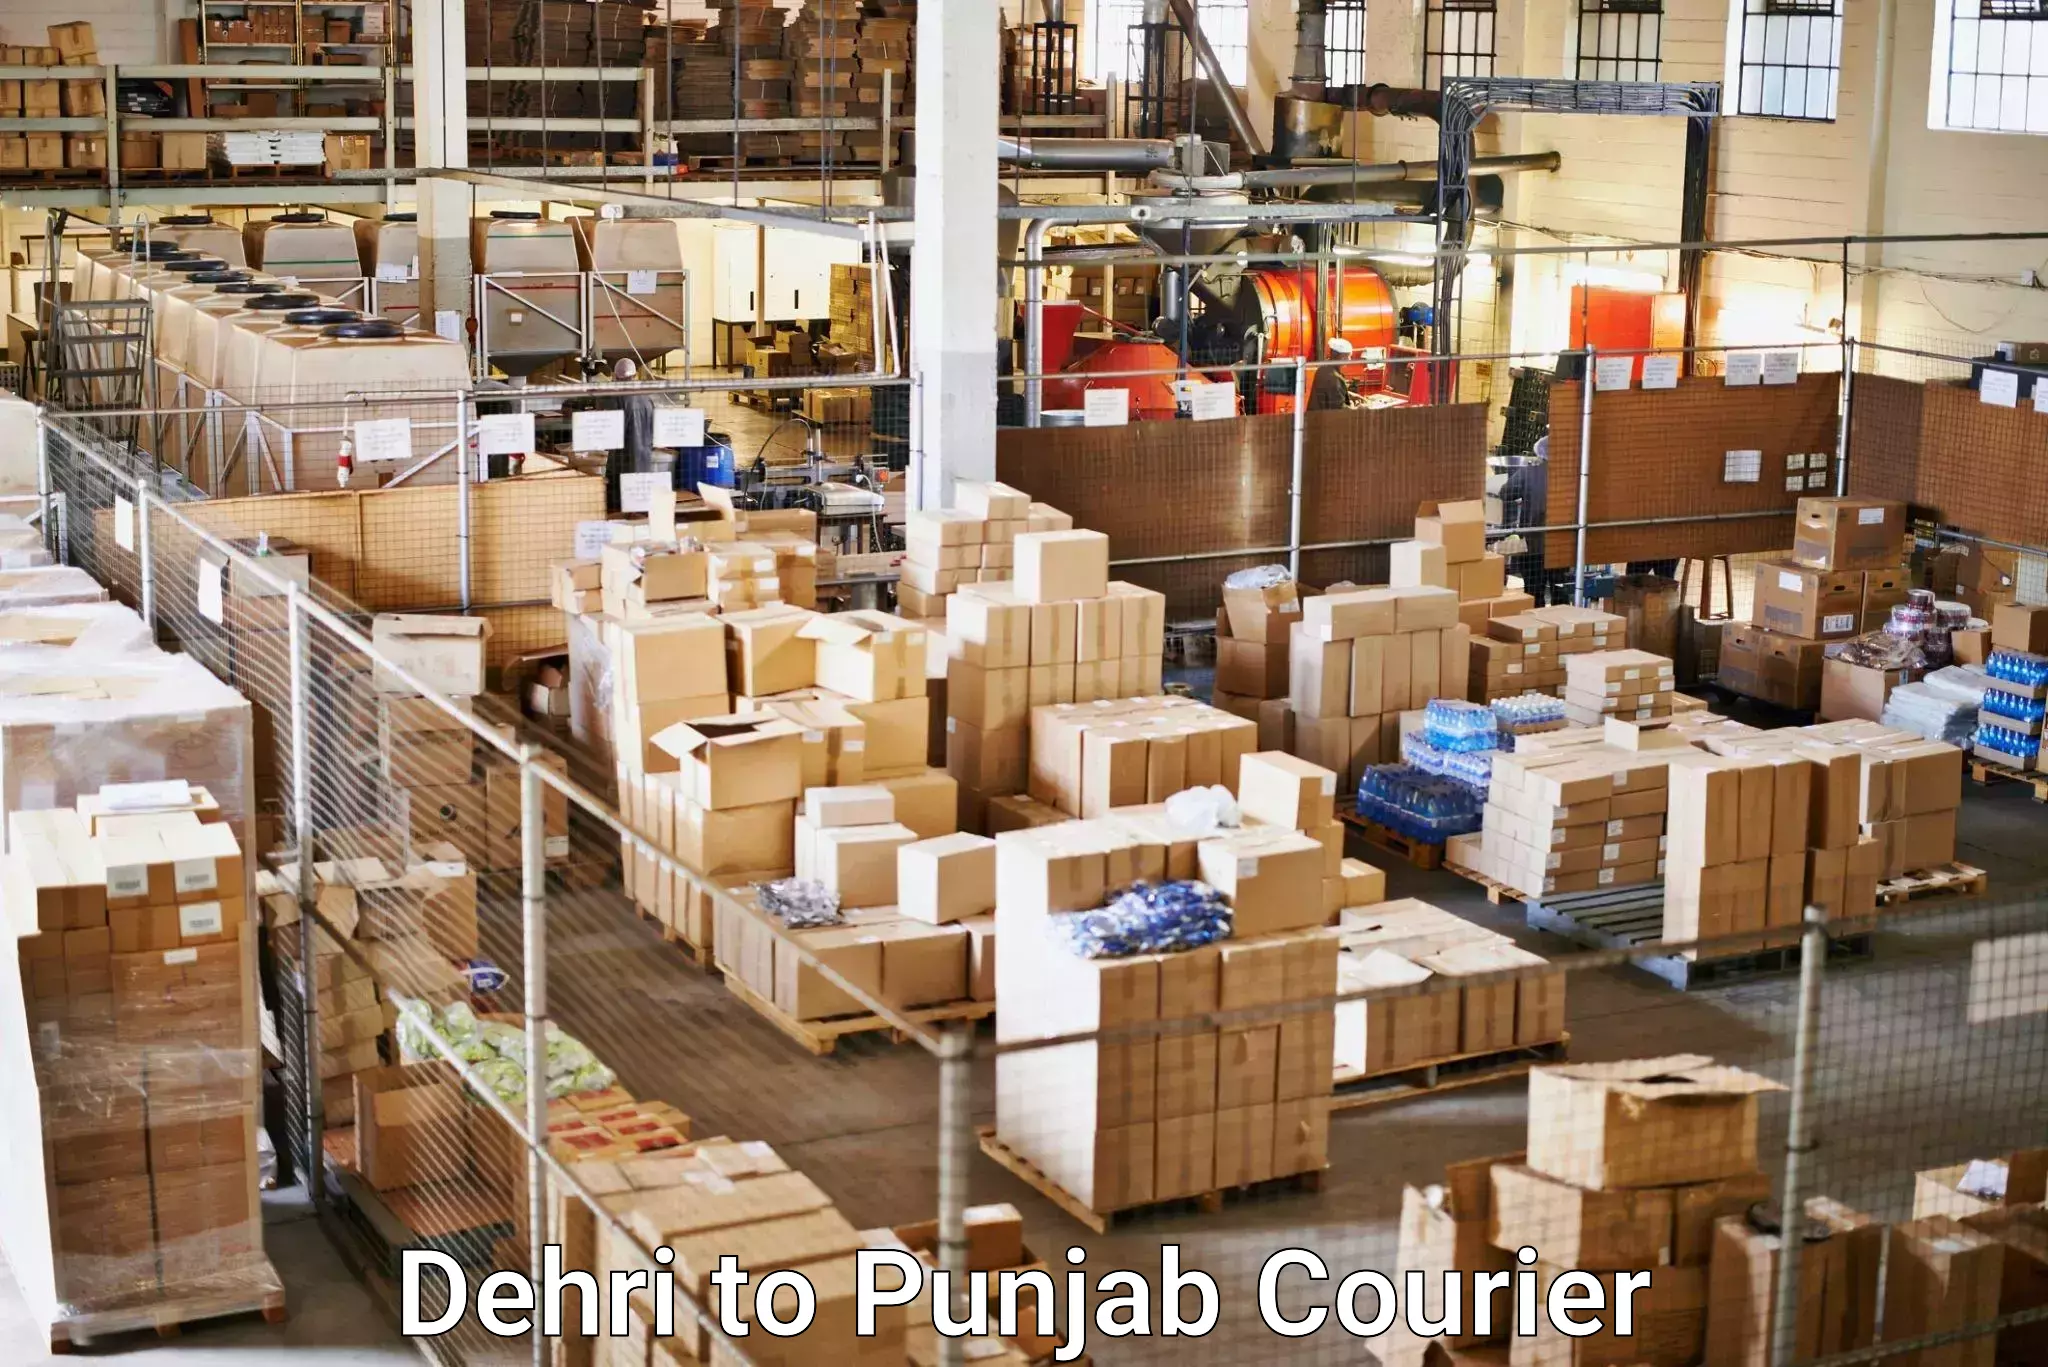 Same-day delivery solutions Dehri to Ajnala